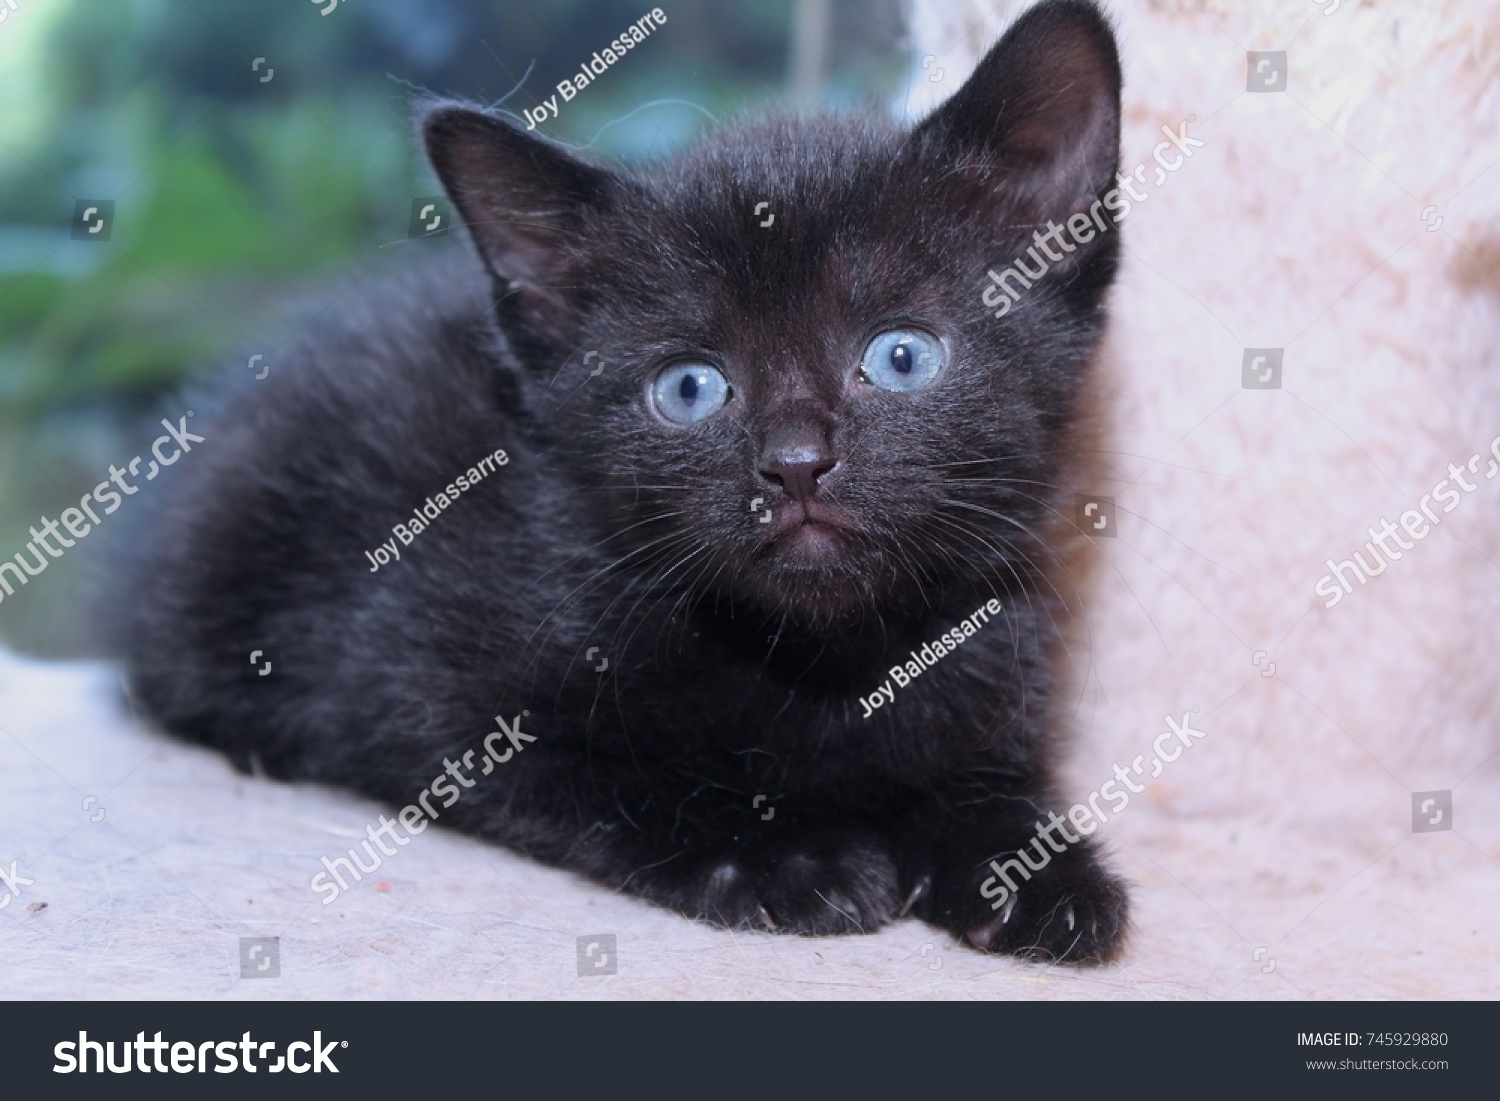 black fluffy cat with blue eyes